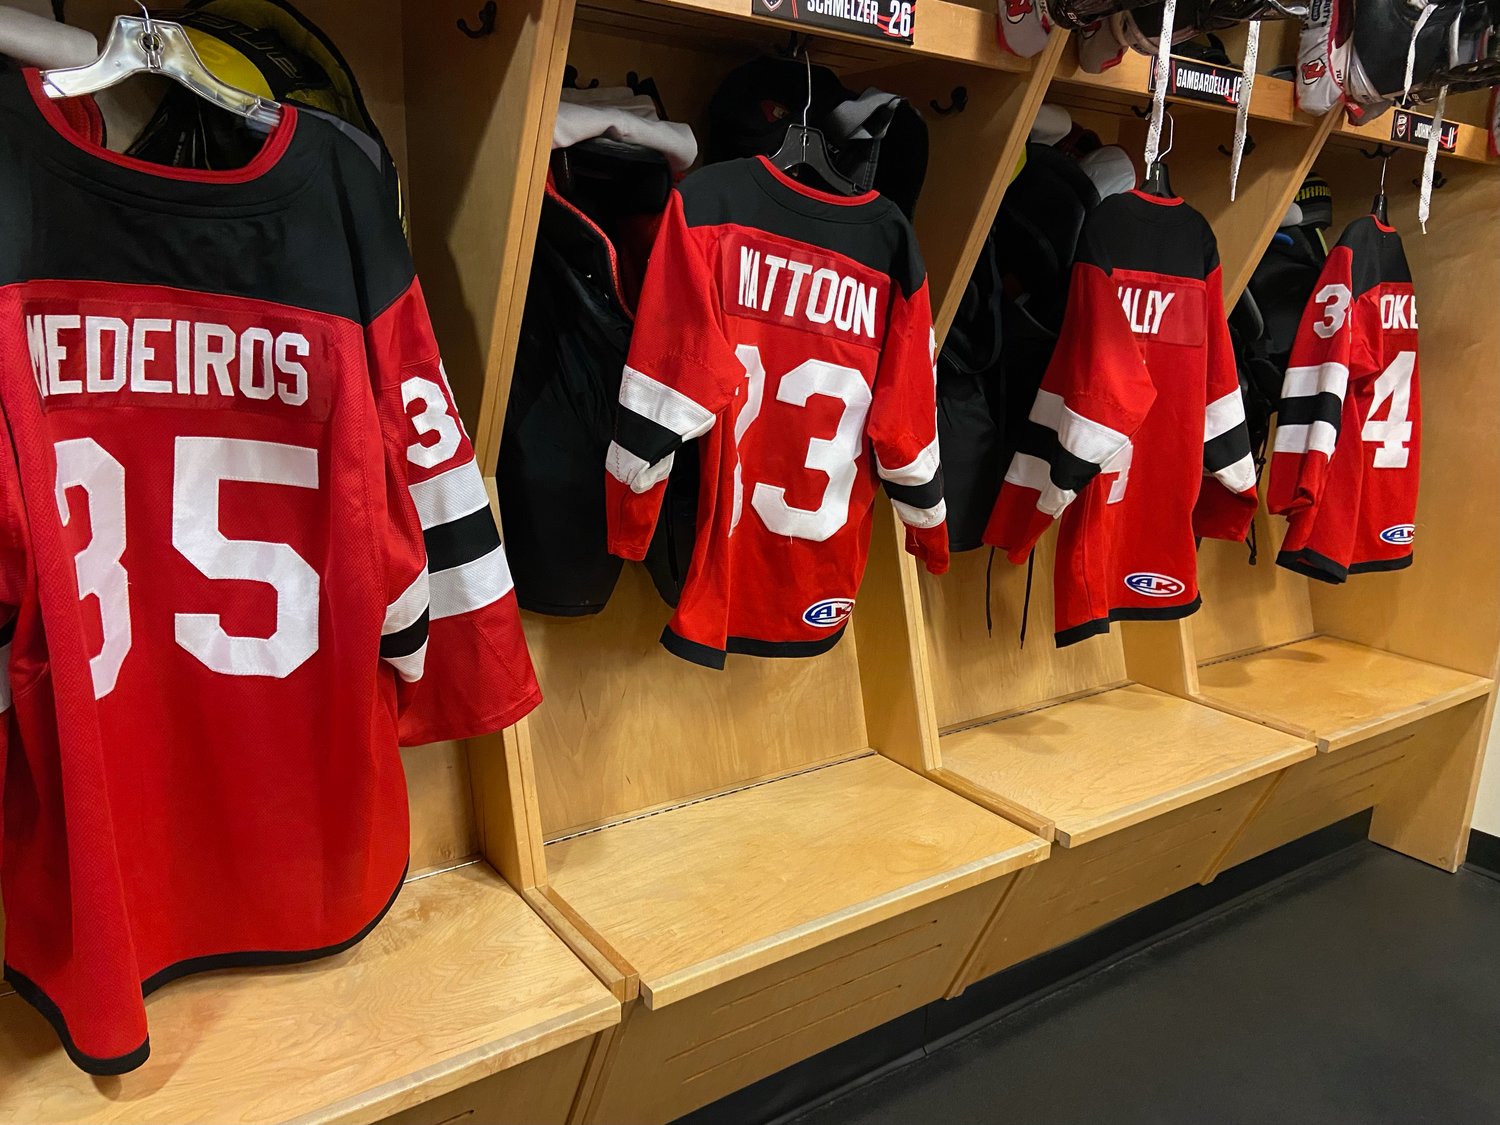 The Junior Comets had their jerseys hung from the stalls of Utica Comets players Saturday afternoon at the Adirondack Bank Center.